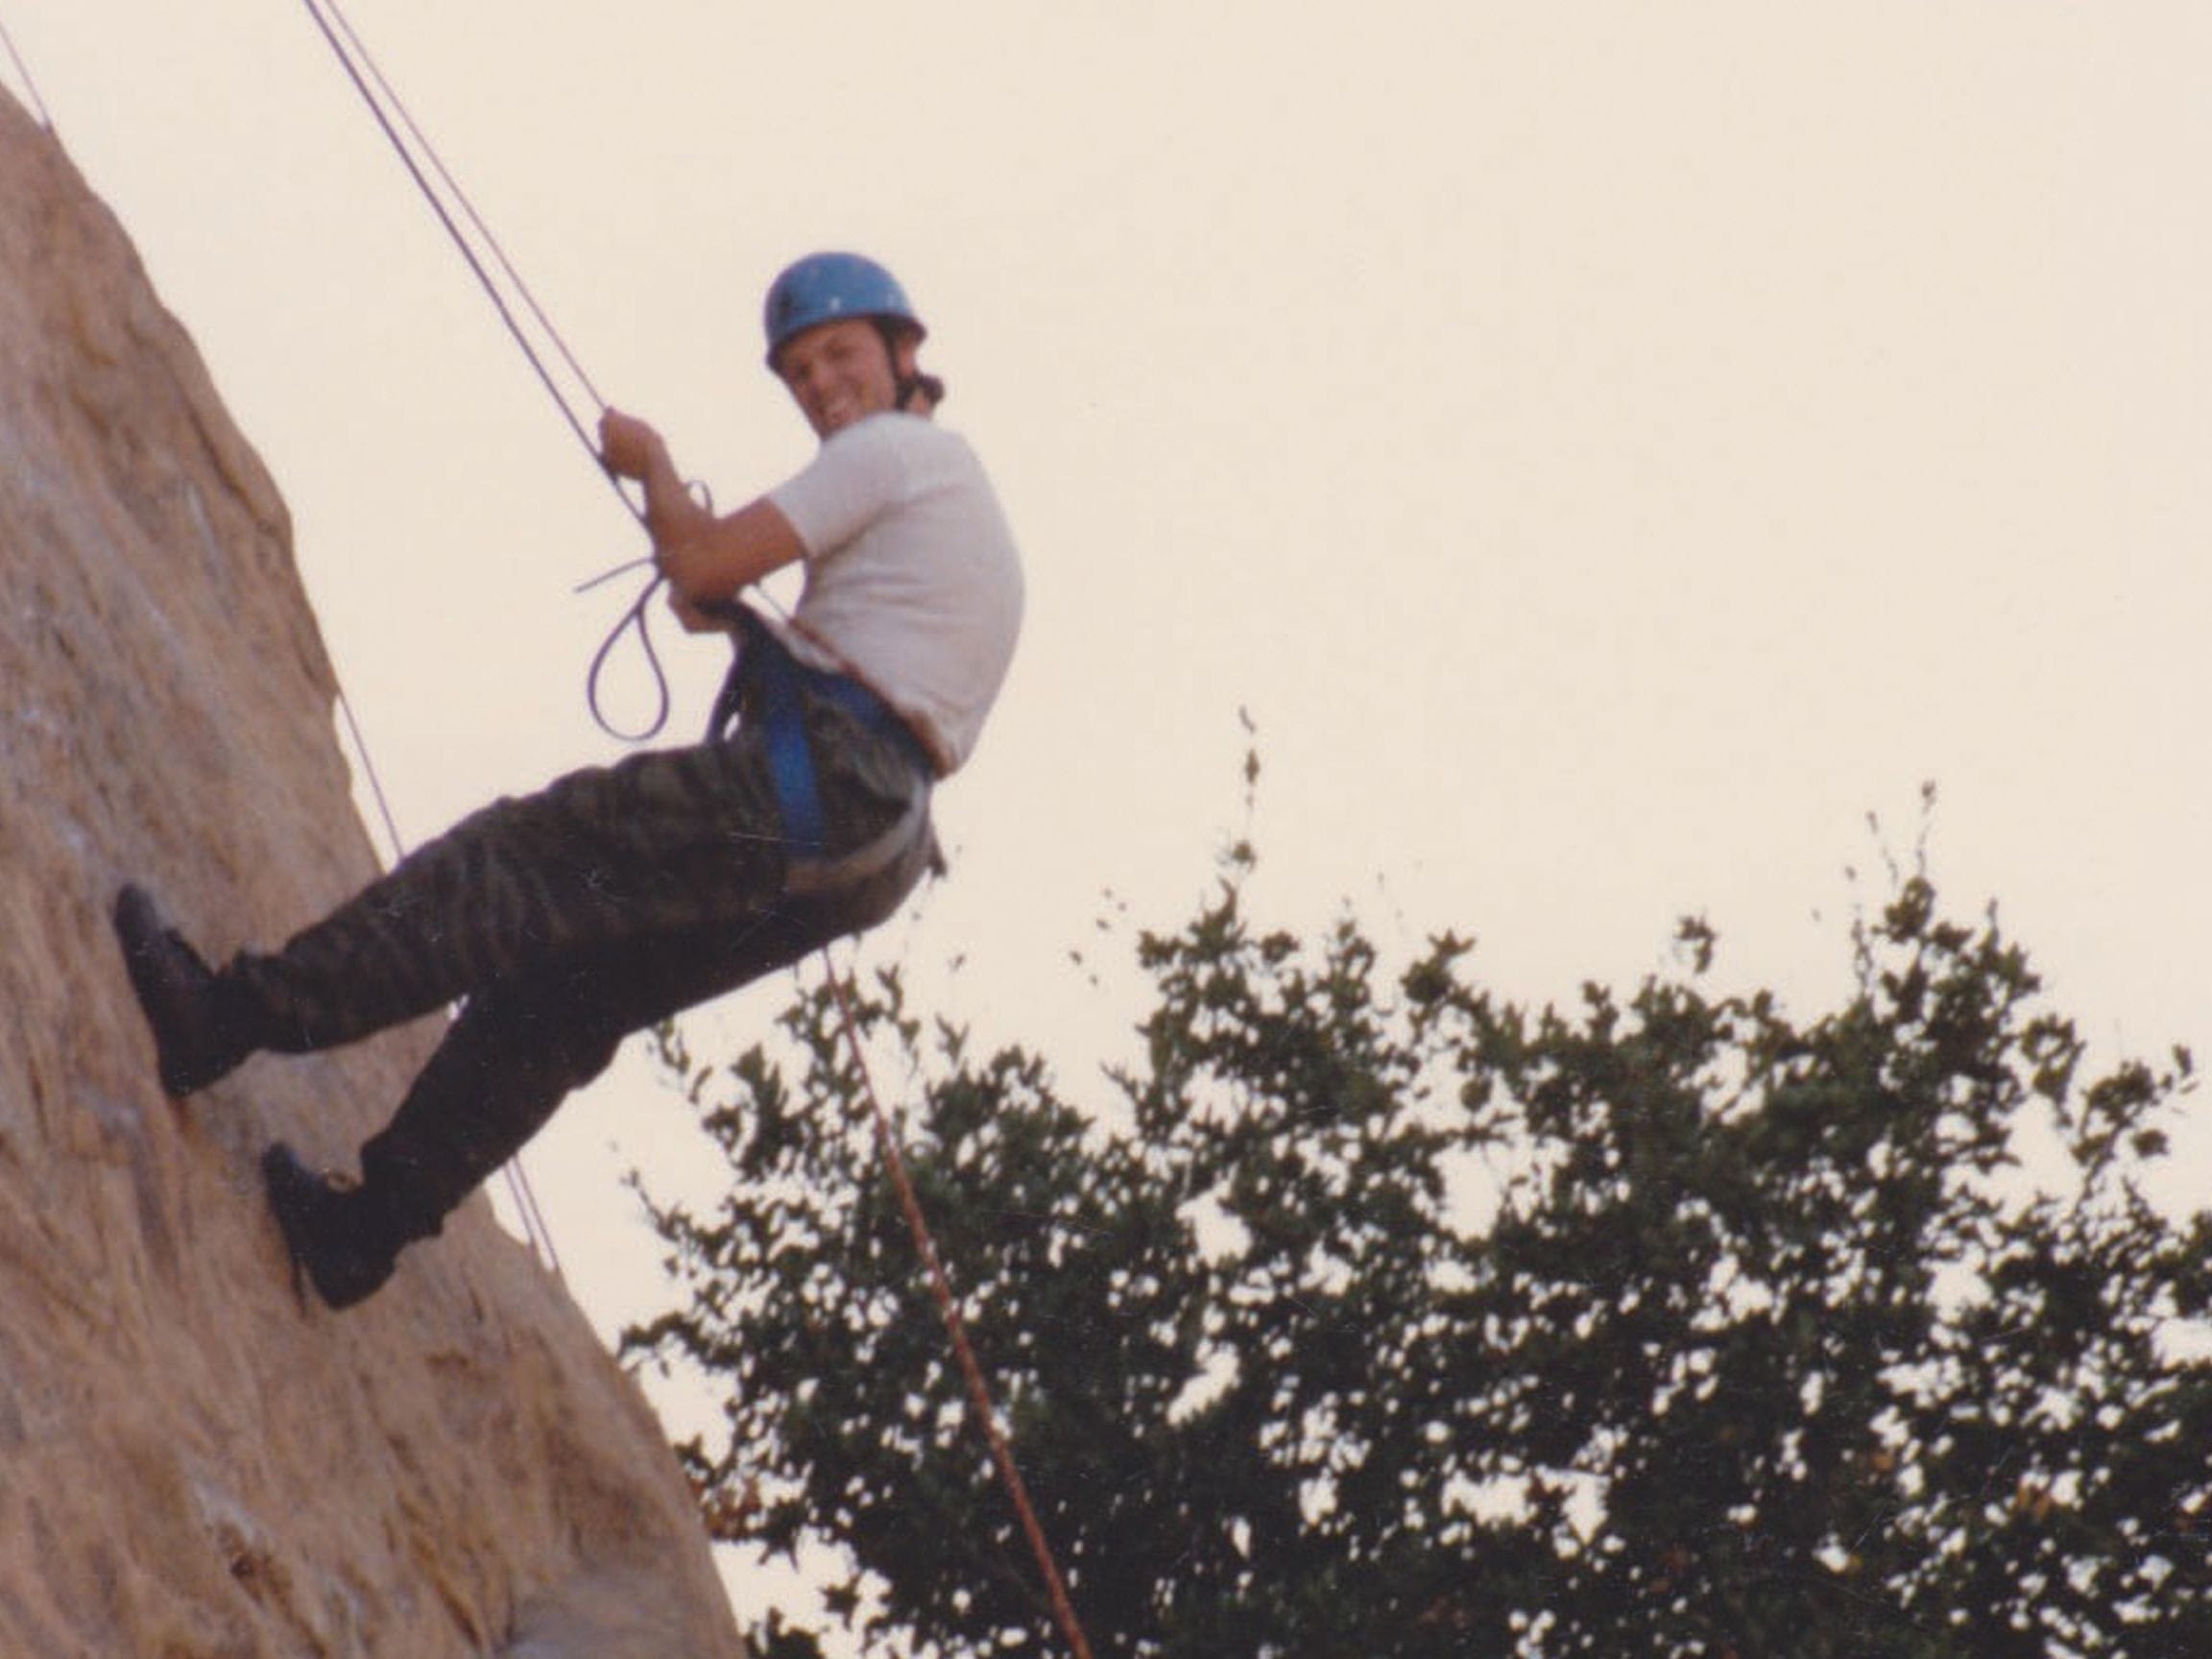 It was one of Jim's self-defense students that introduced him to rock climbing and rappelling that led to joining the Search & Rescue Team.